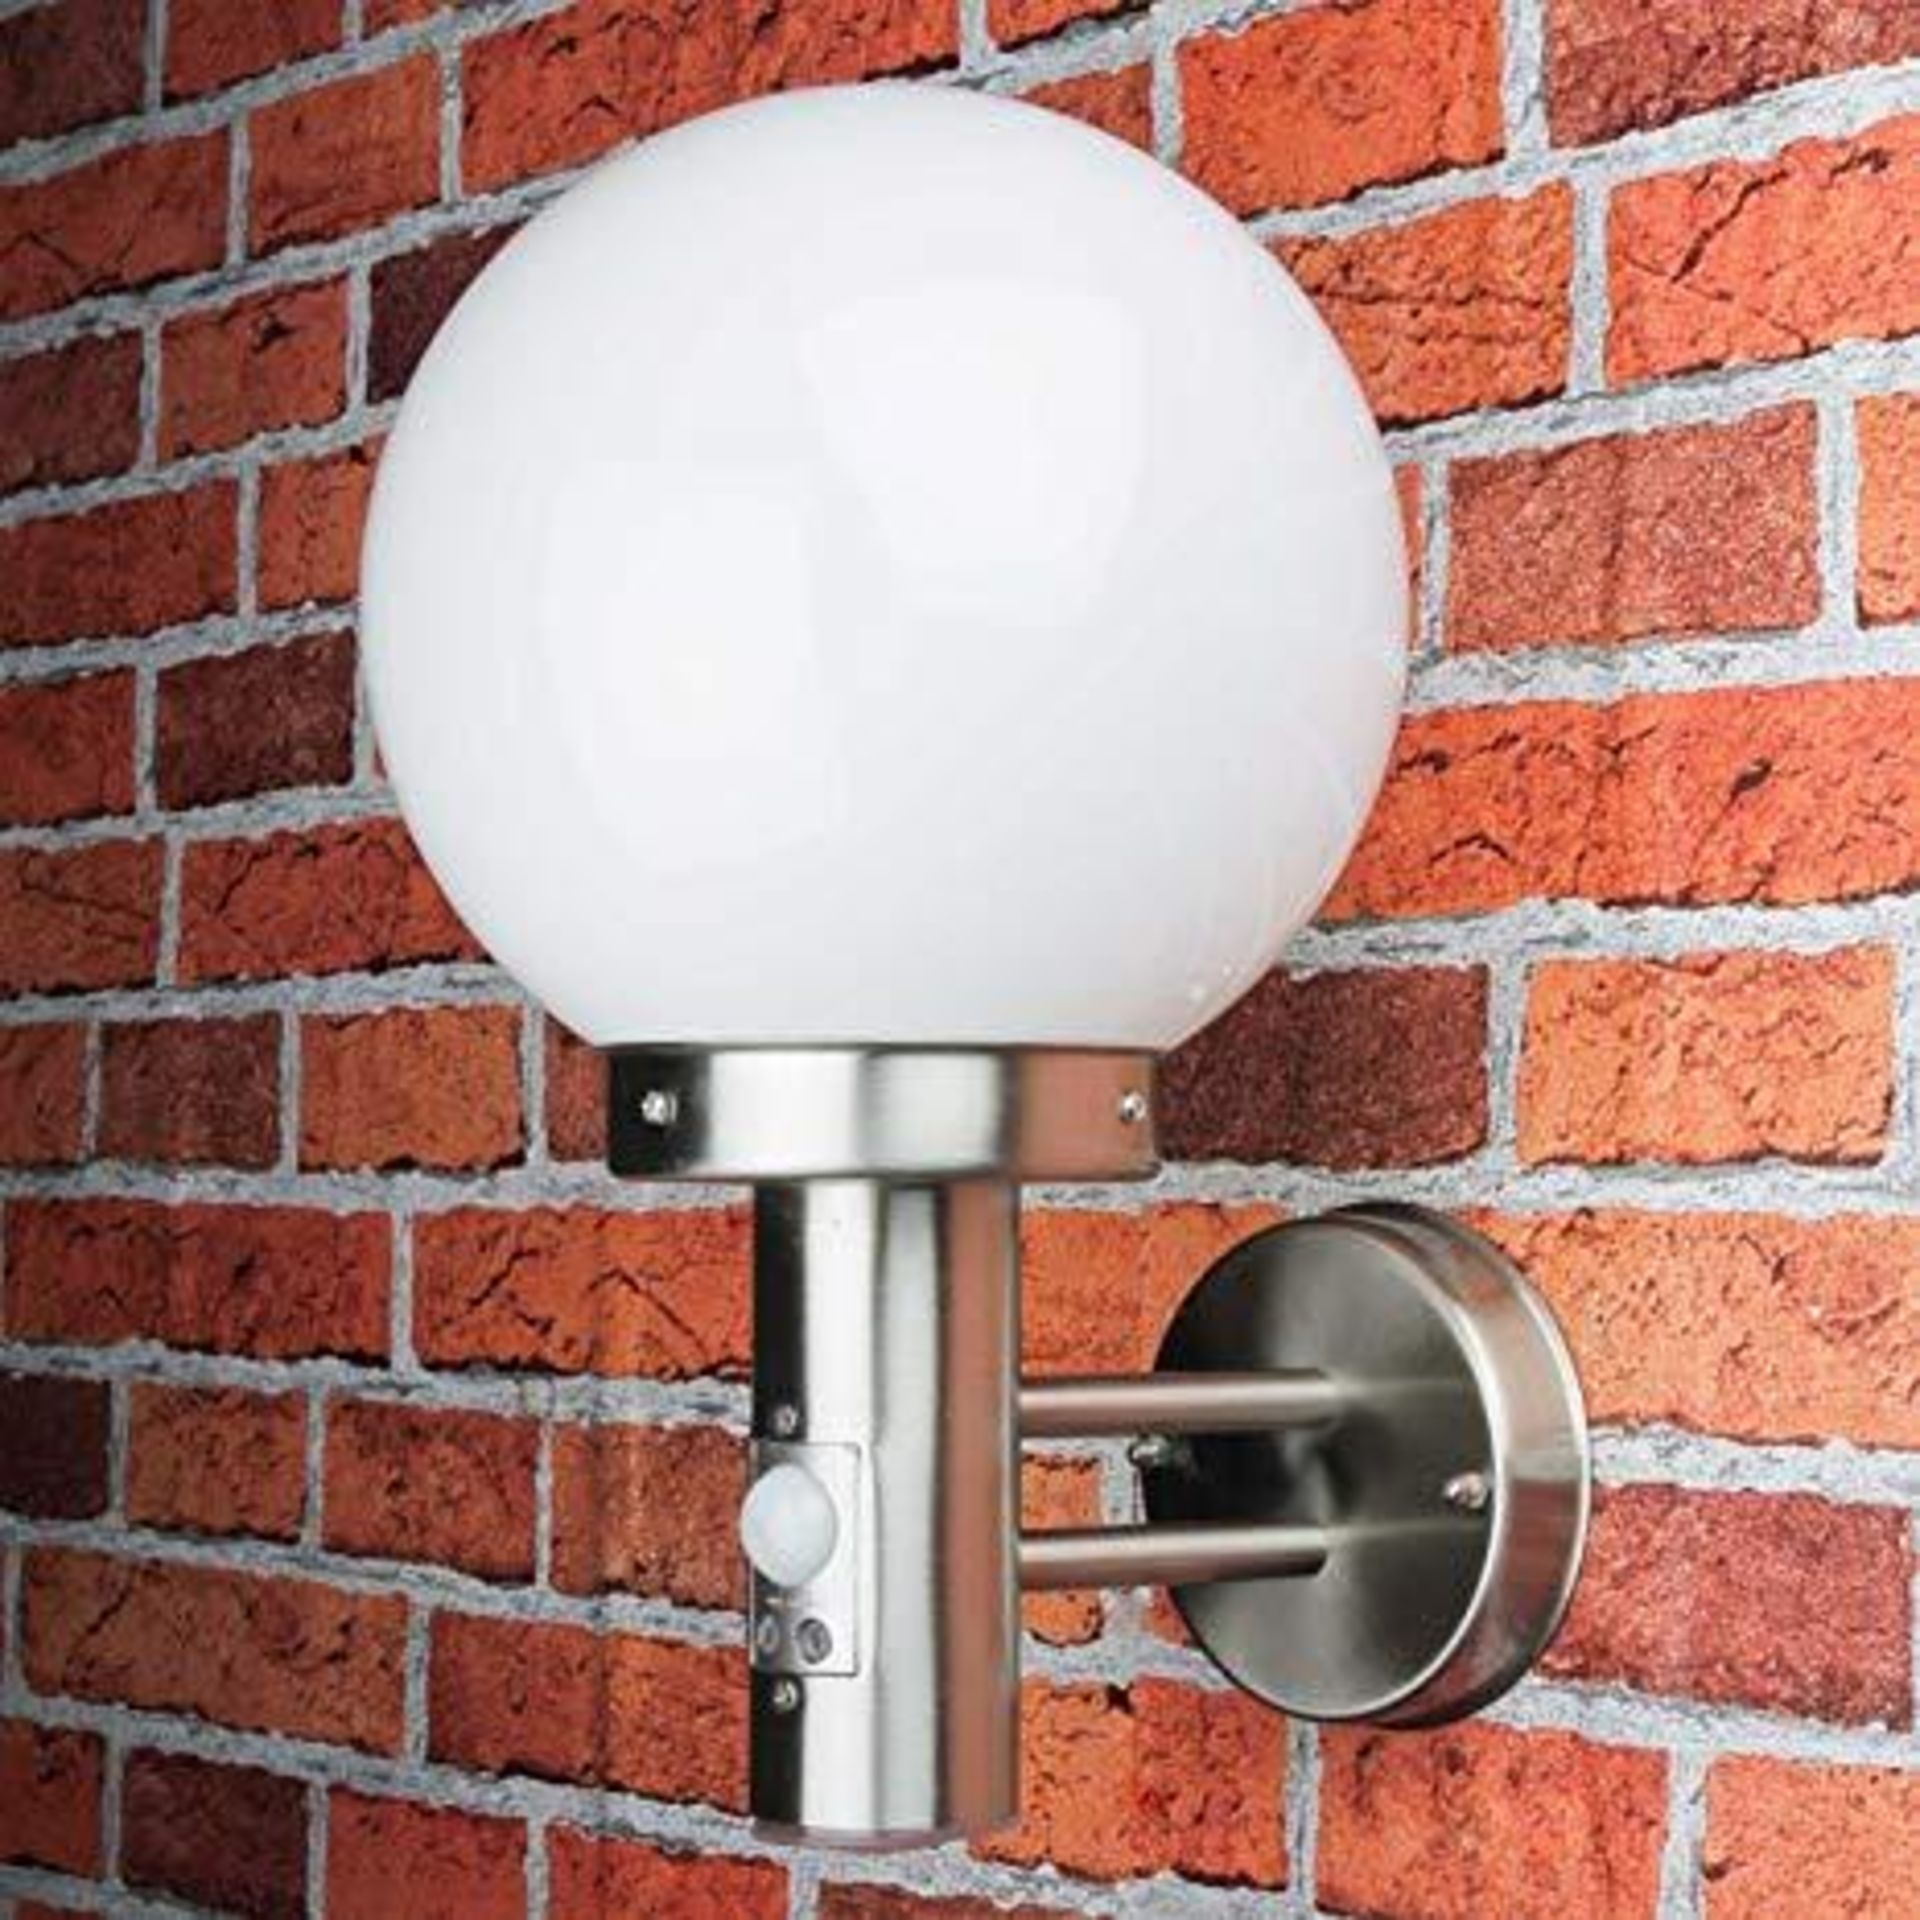 2 x Globe Outdoor Wall Light With PIR Motion Sensor - Stainless Steel With Polycarbonate Shade - IP4 - Bild 3 aus 5